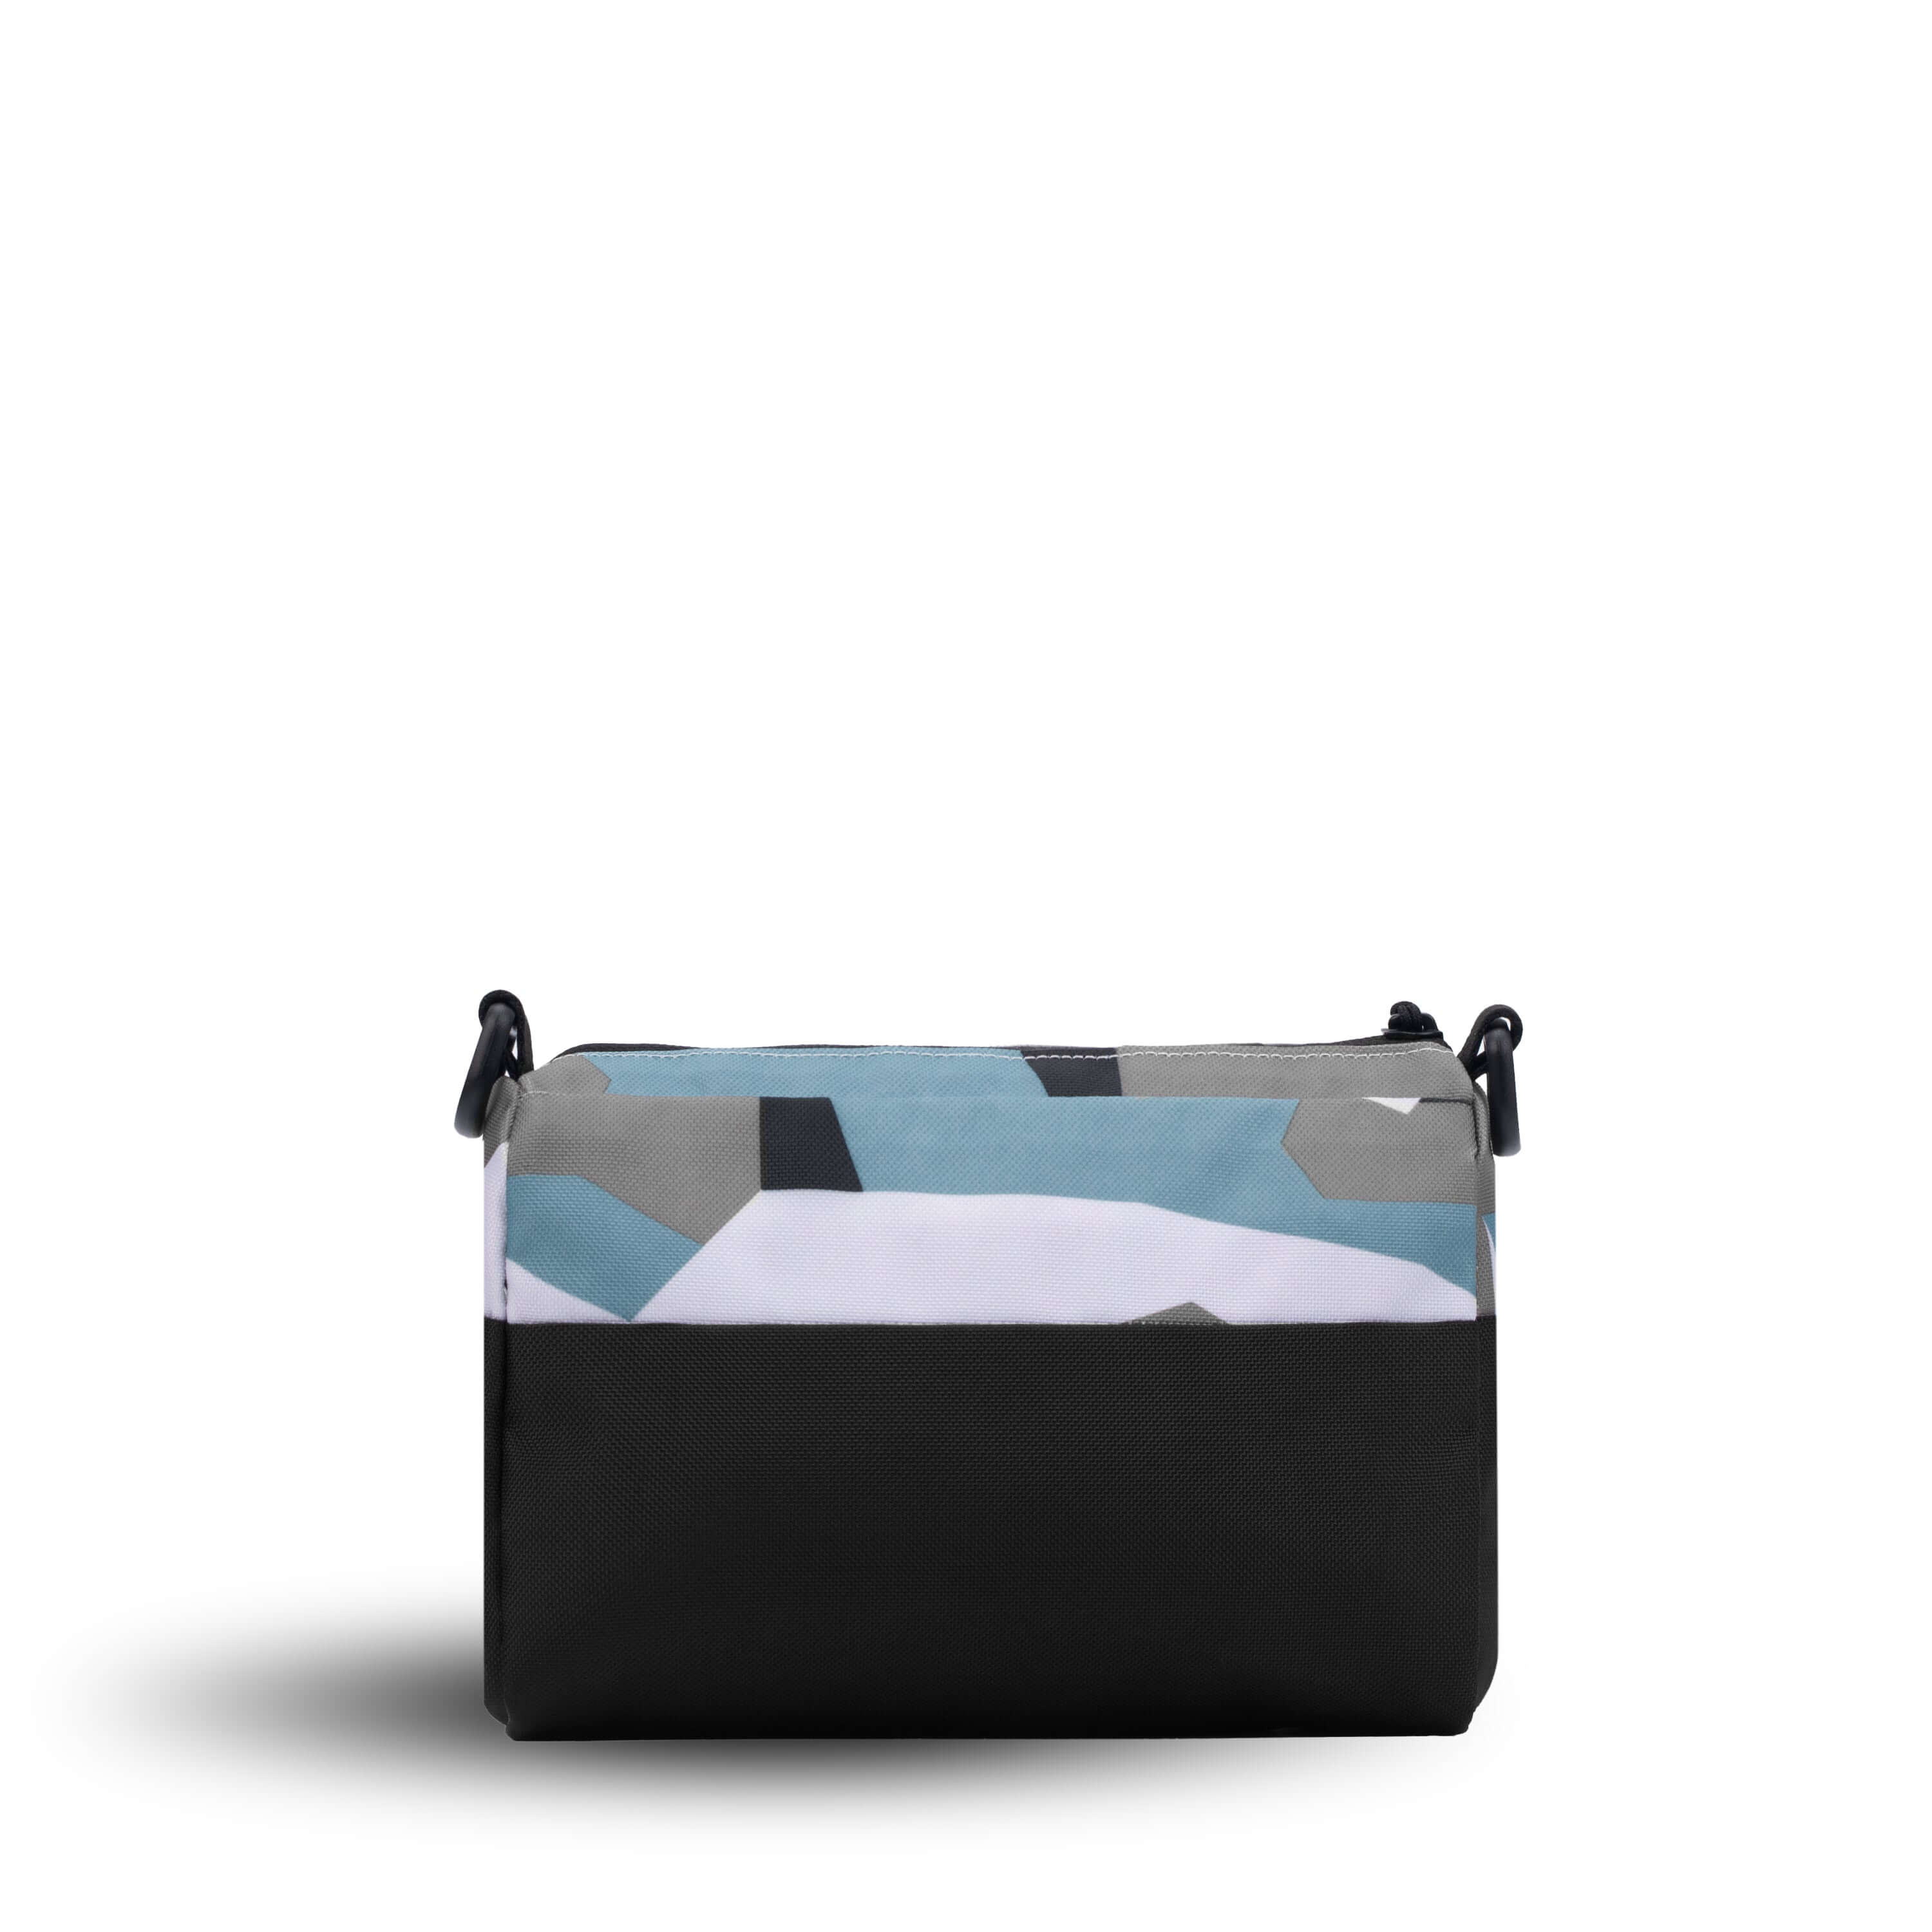 Back view of Sherpani's purse, the Skye in Summer Camo. It is two toned, the top half of the bag is a camouflage pattern of white, gray and blue, and the bottom half of the bag is black. 